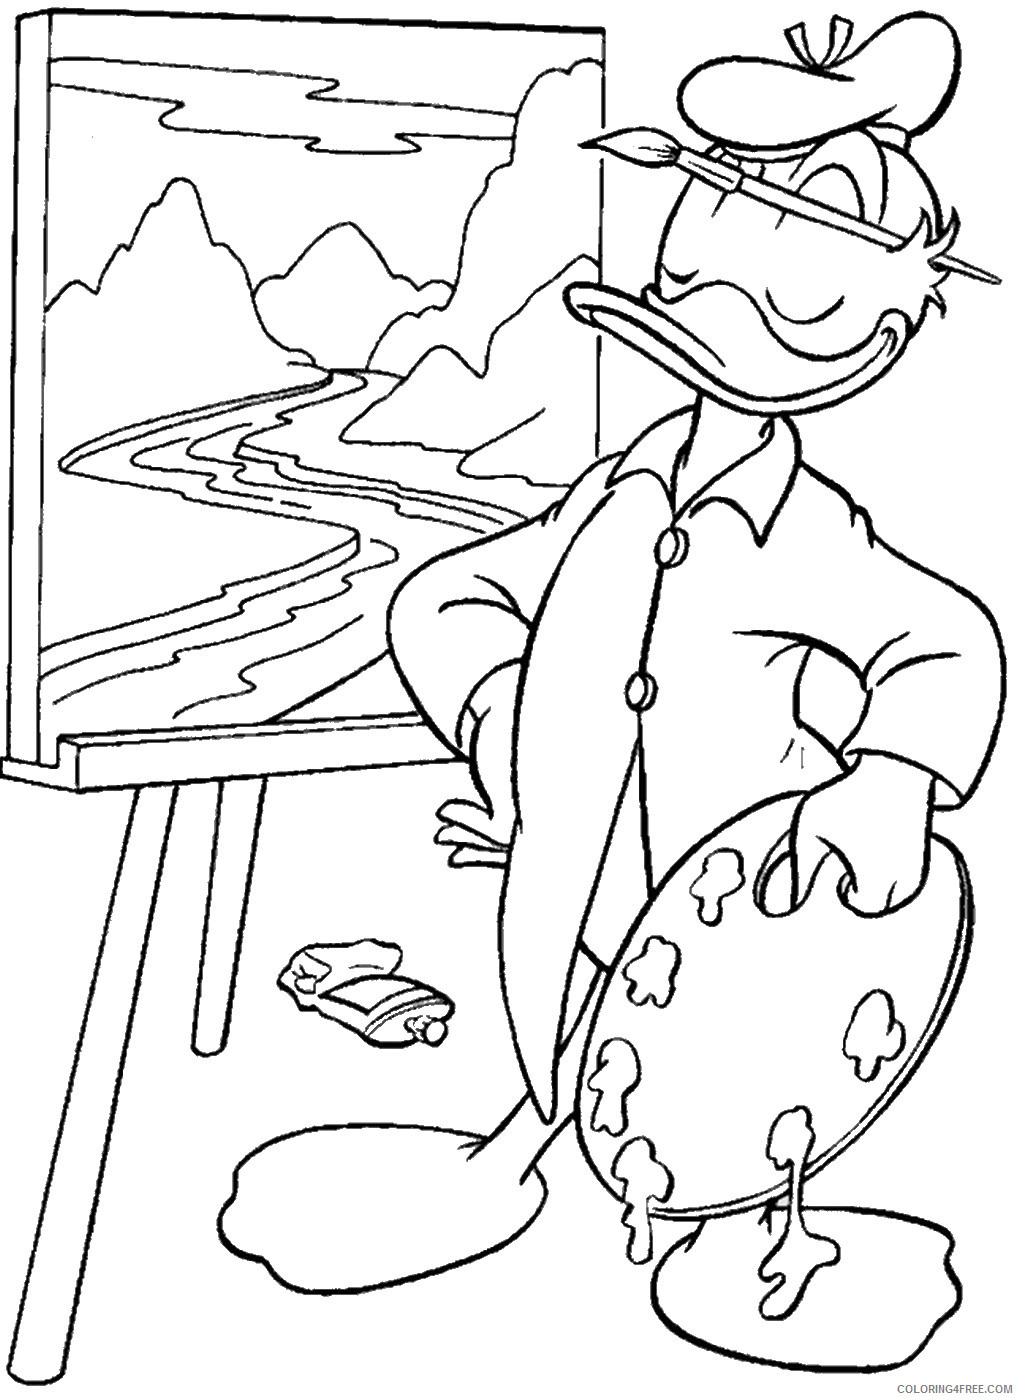 Donald Duck Coloring Pages Cartoons donald_10 Printable 2020 2512 Coloring4free